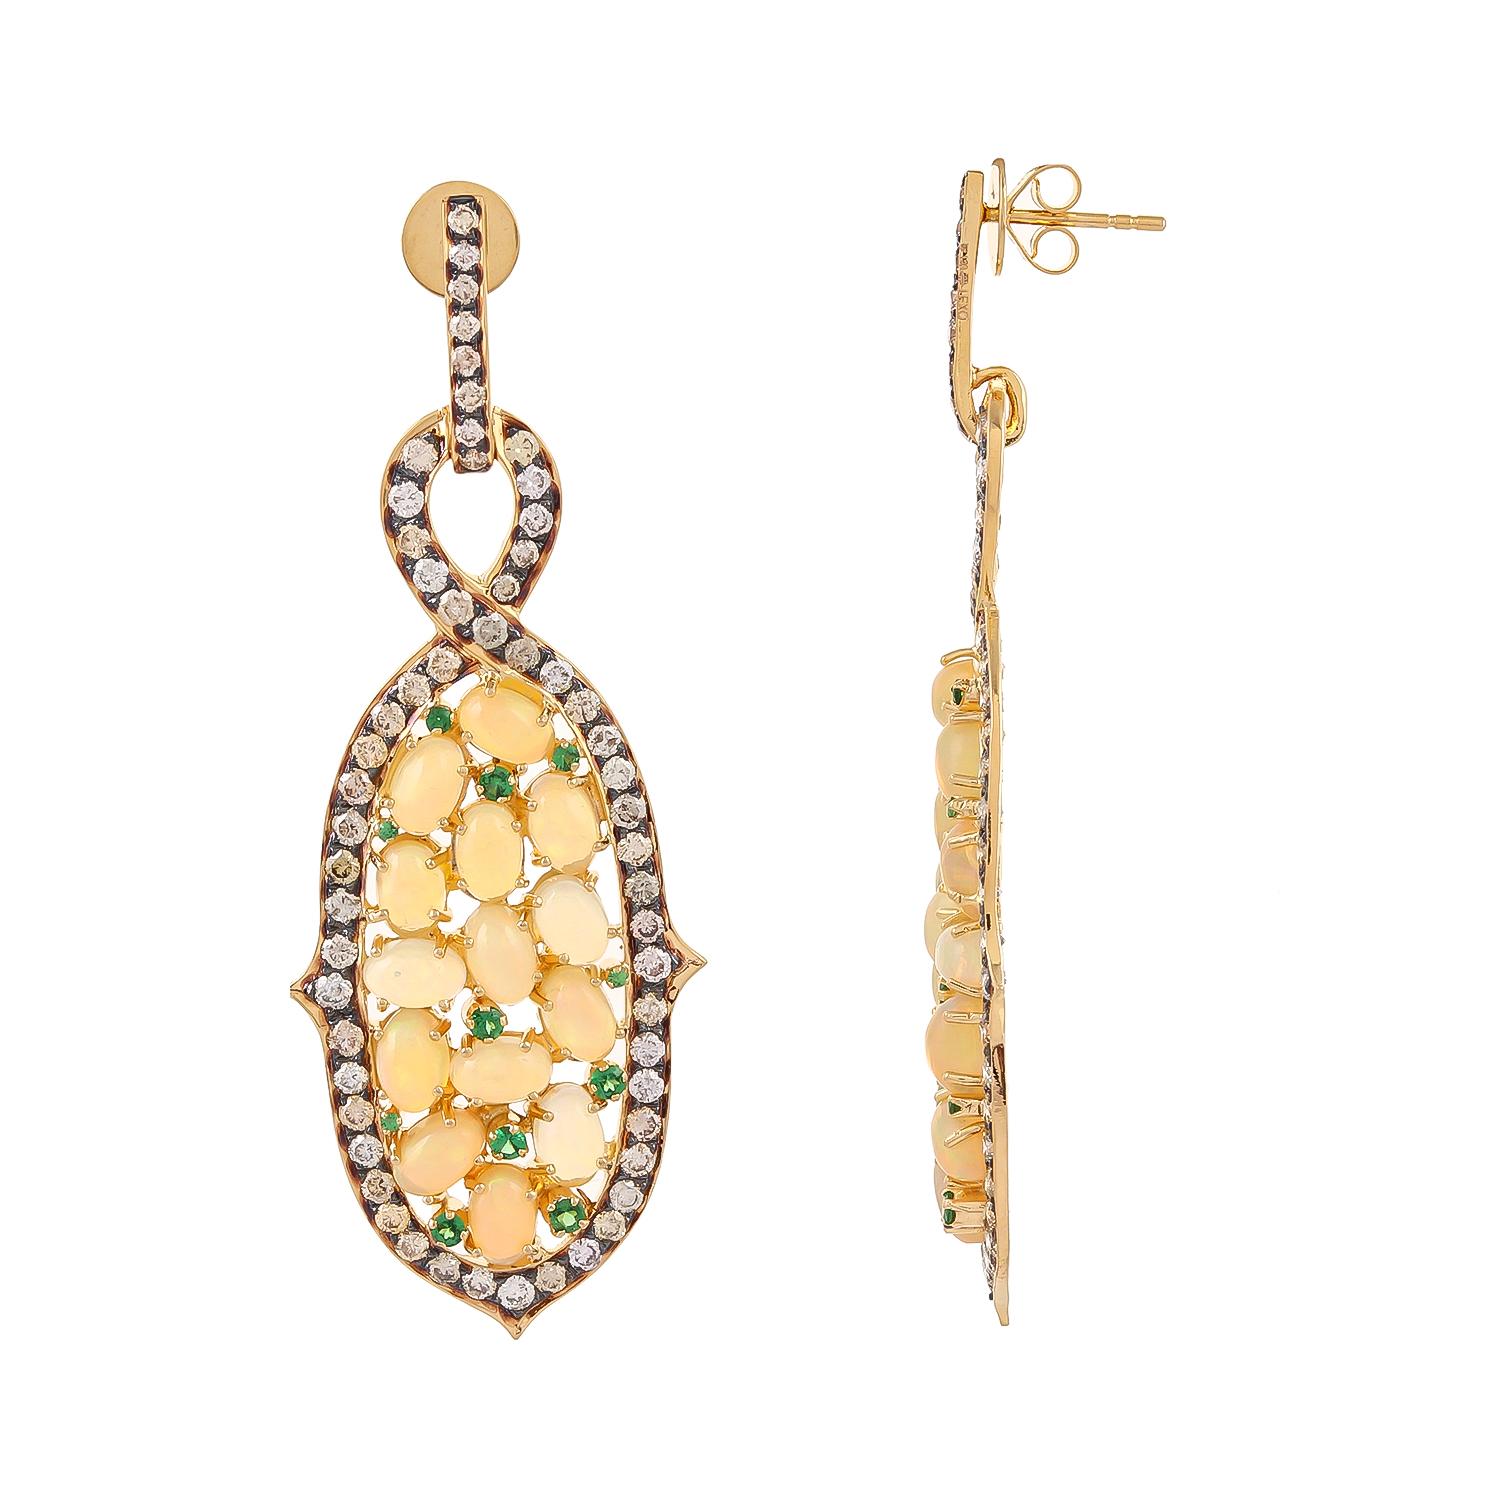 Interesting combination of opal cabochons weighing a total of 10.61cts and tsavorites weighing 0.63cts are set in an unusual shape of byzantine shapes. 4.39ct diamonds accented in black rhodium enhance the total look of these 18kt gold ear